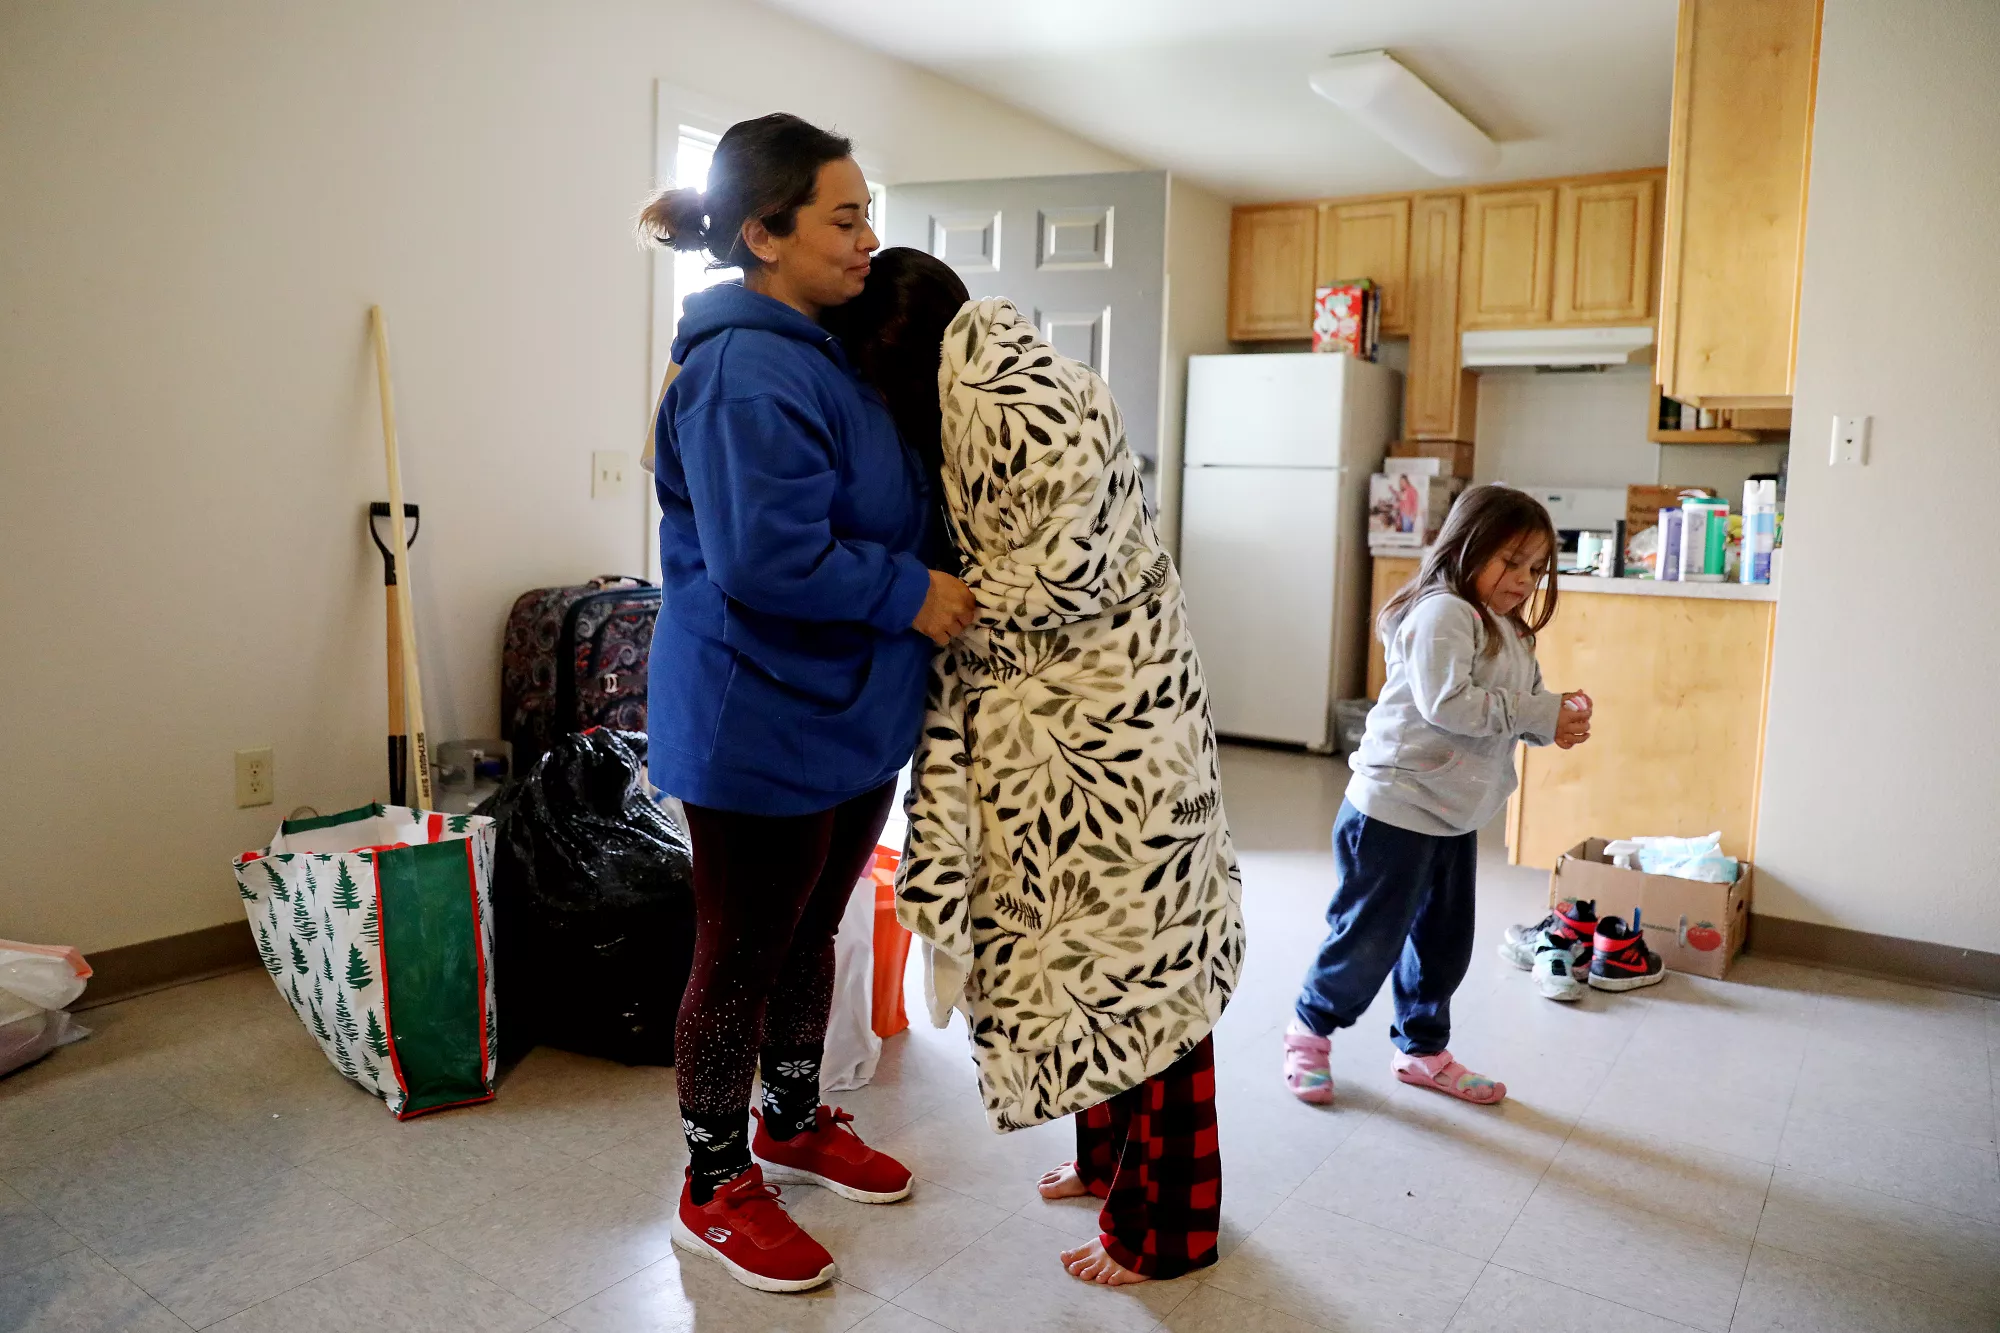 Erica Lopez Bedolla, left, with daughters Miley Lopez, 10, center, and Leanie Lopez, 4, at their temporary housing. The Lopez family had to evacuate to temporary shelter at Felix Torres Housing after their home was severely flooded from a storm in Planada, California in January 2023. Photo: Gary Coronado / Los Angeles Times